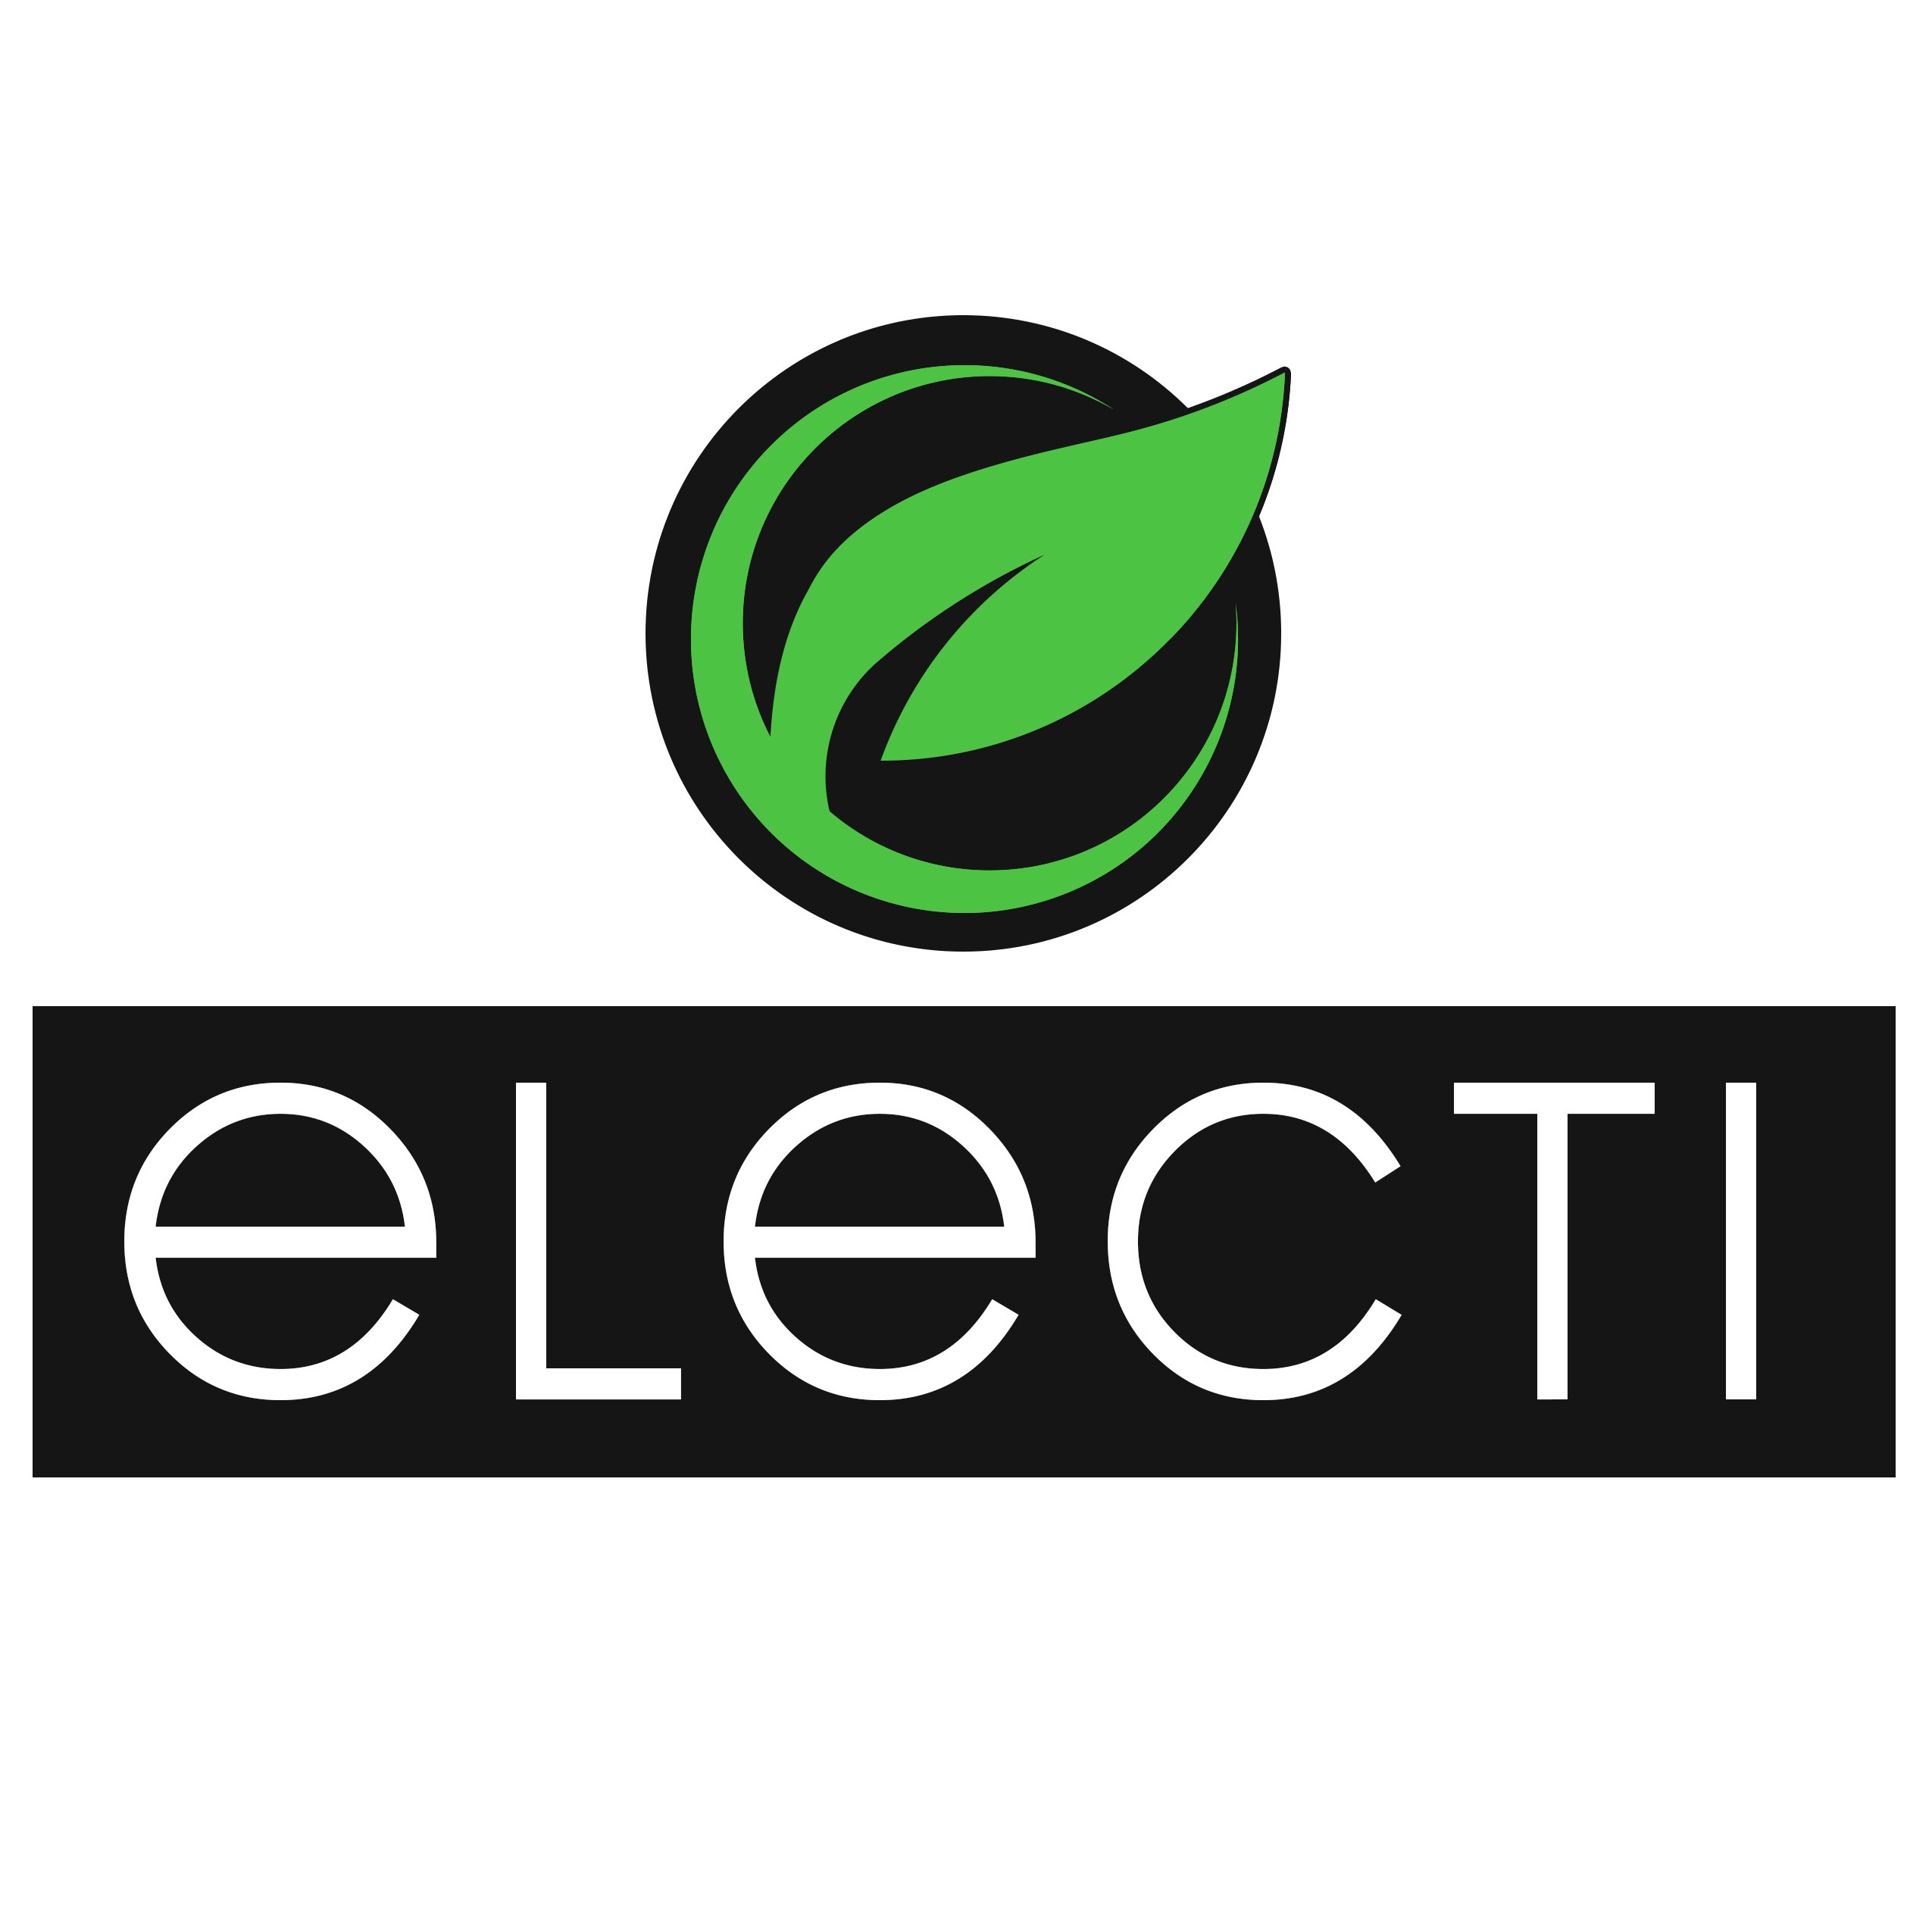 Electi focuses in providing top quality CBD products at an affordable price.